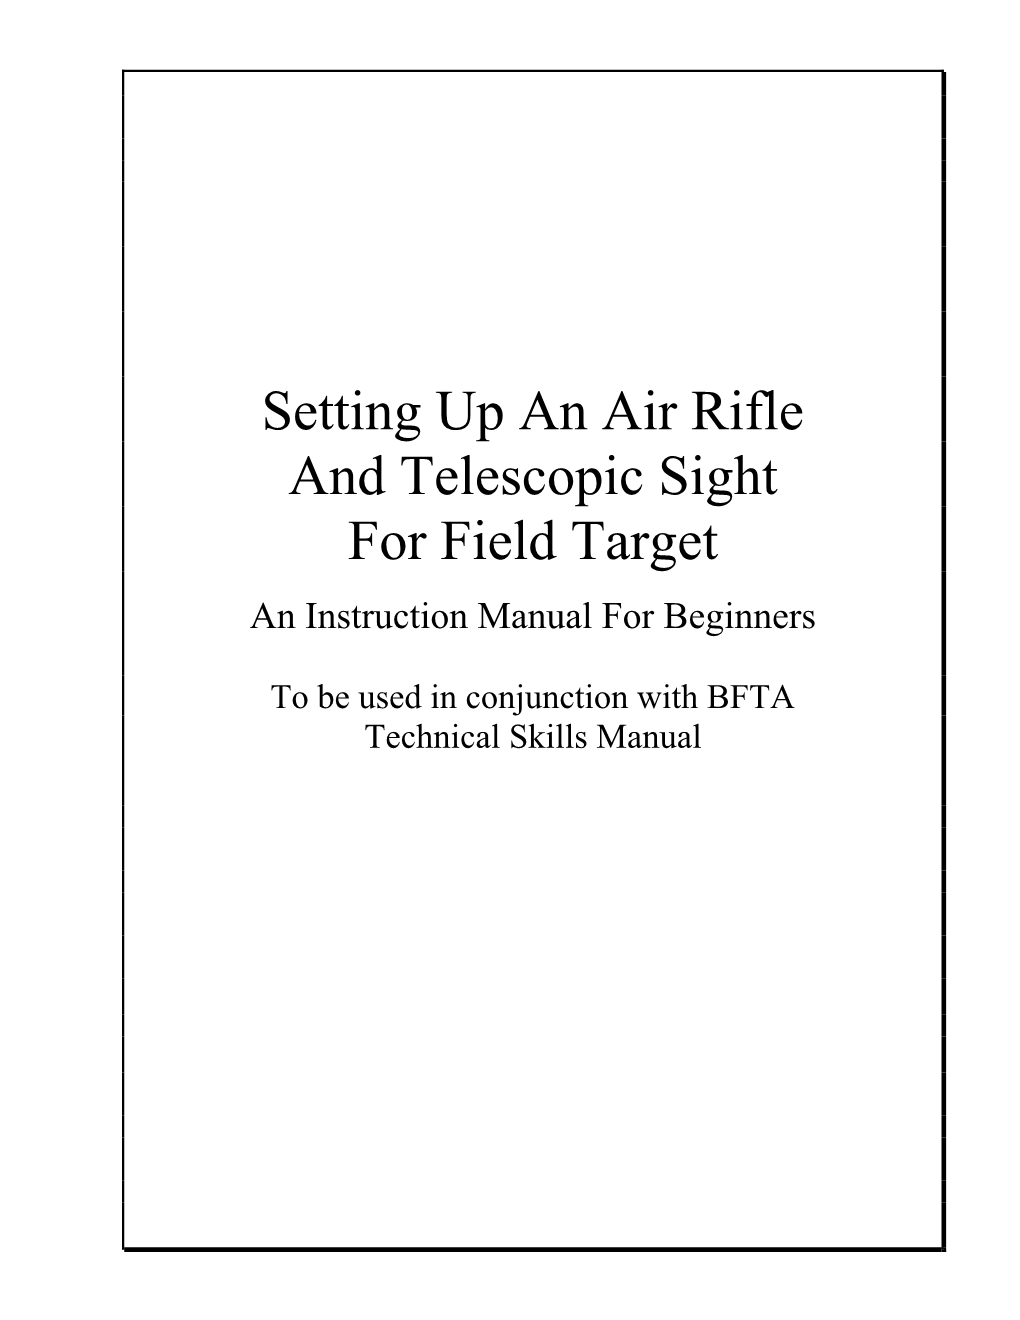 Setting up an Air Rifle and Telescopic Sight for Field Target